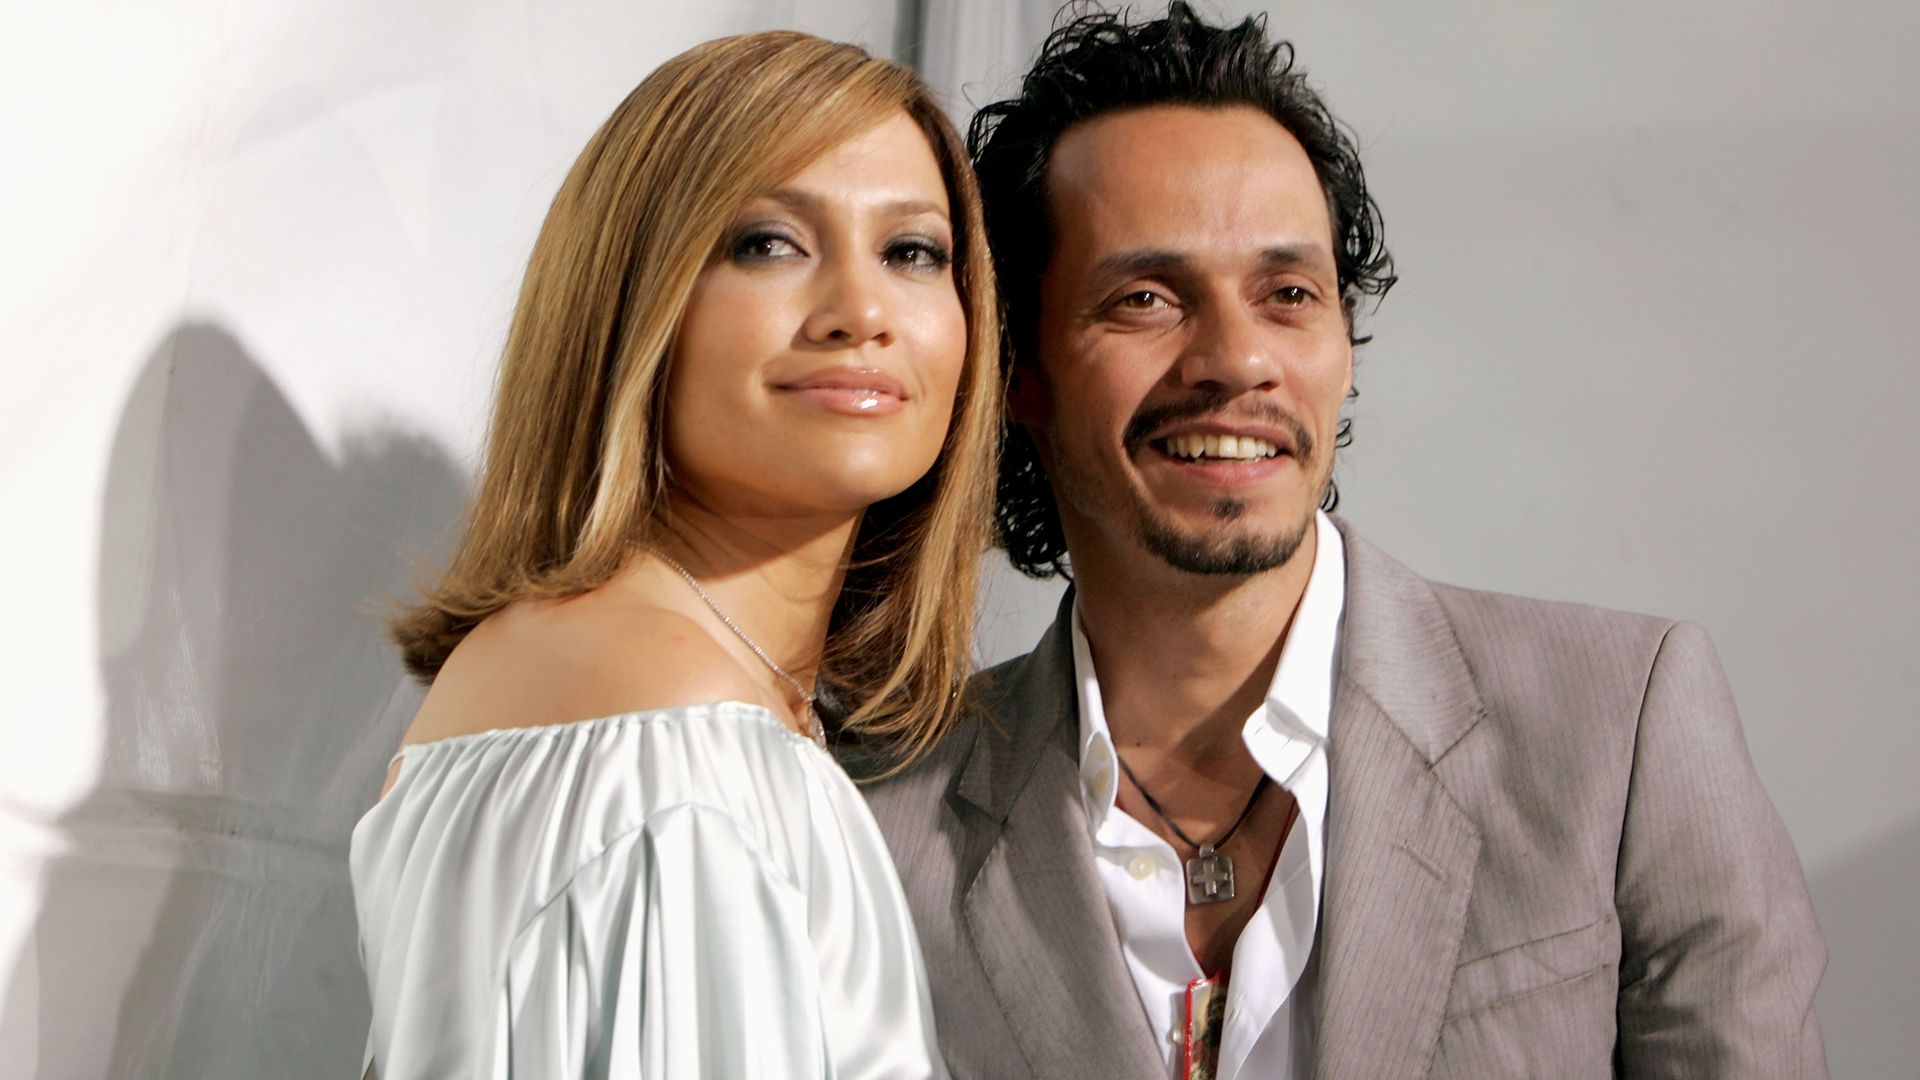 WESTWOOD, CA - APRIL 29:  Actress Jennifer Lopez (L) and her husband musician Marc Anthony arrive at New Line Cinema's Premiere of "Monster In Law" at the Mann National Theatre on April 29, 2005 in Westwood, California.  (Photo by Kevin Winter/Getty Images)